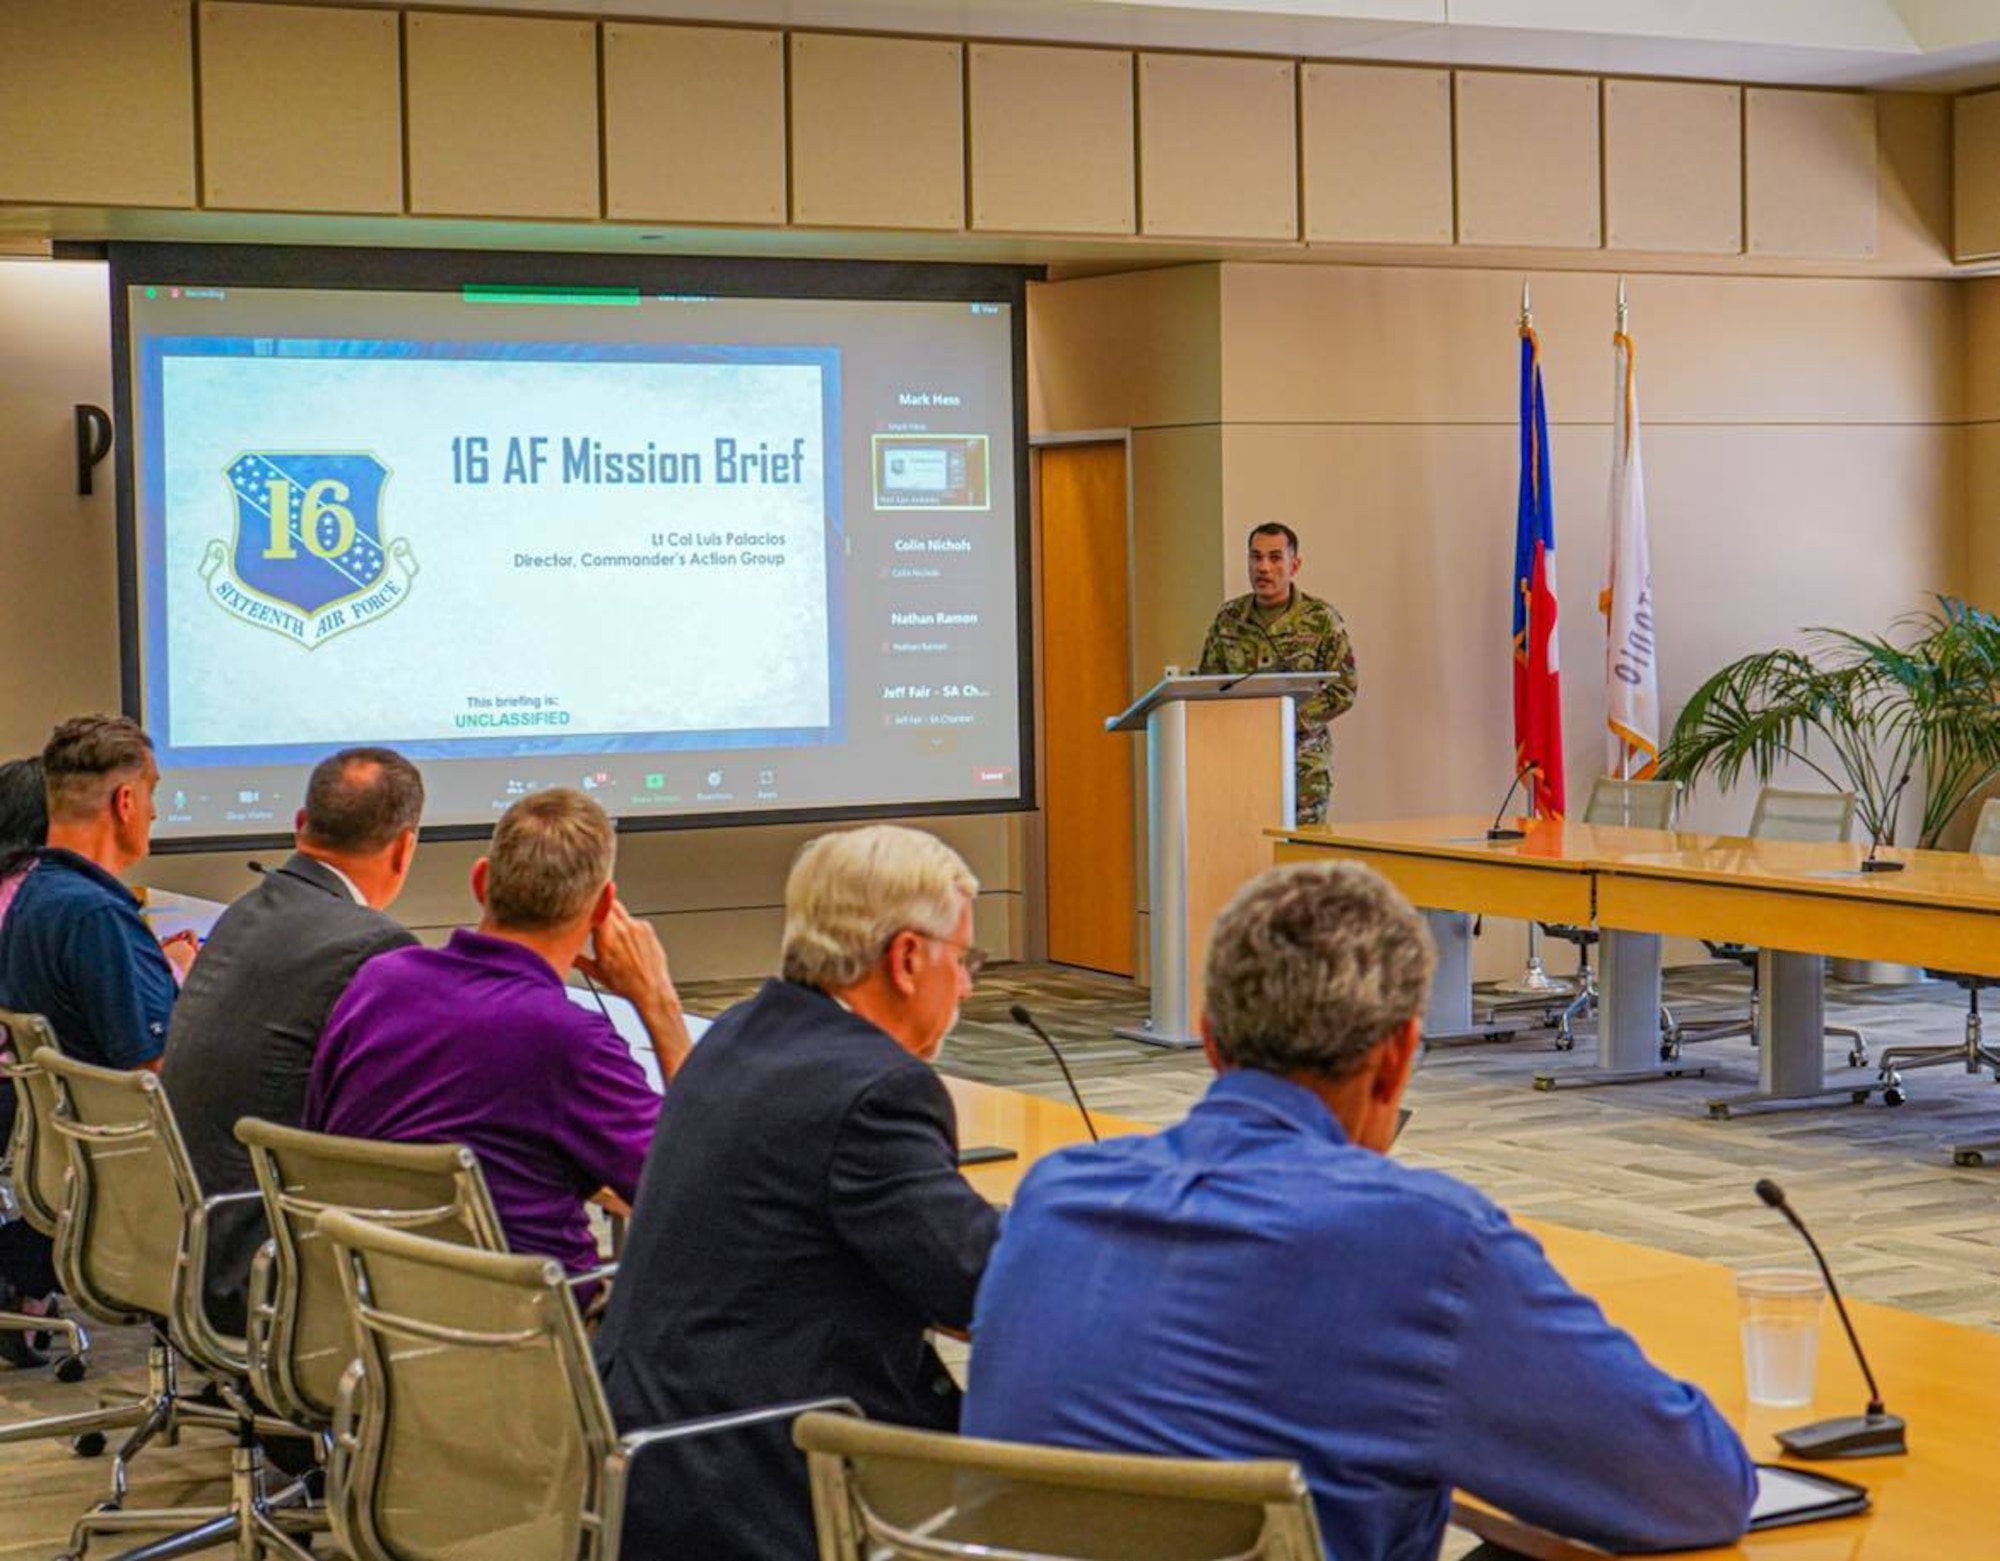 Lt. Col. Luis Palacios, Director of Commander’s Action Group, 16th Air Force (Air Forces Cyber) provides a mission brief at the San Antonio Chamber’s Cybersecurity and Military Affairs Councils joint meeting at Port San Antonio, Texas, June 1.